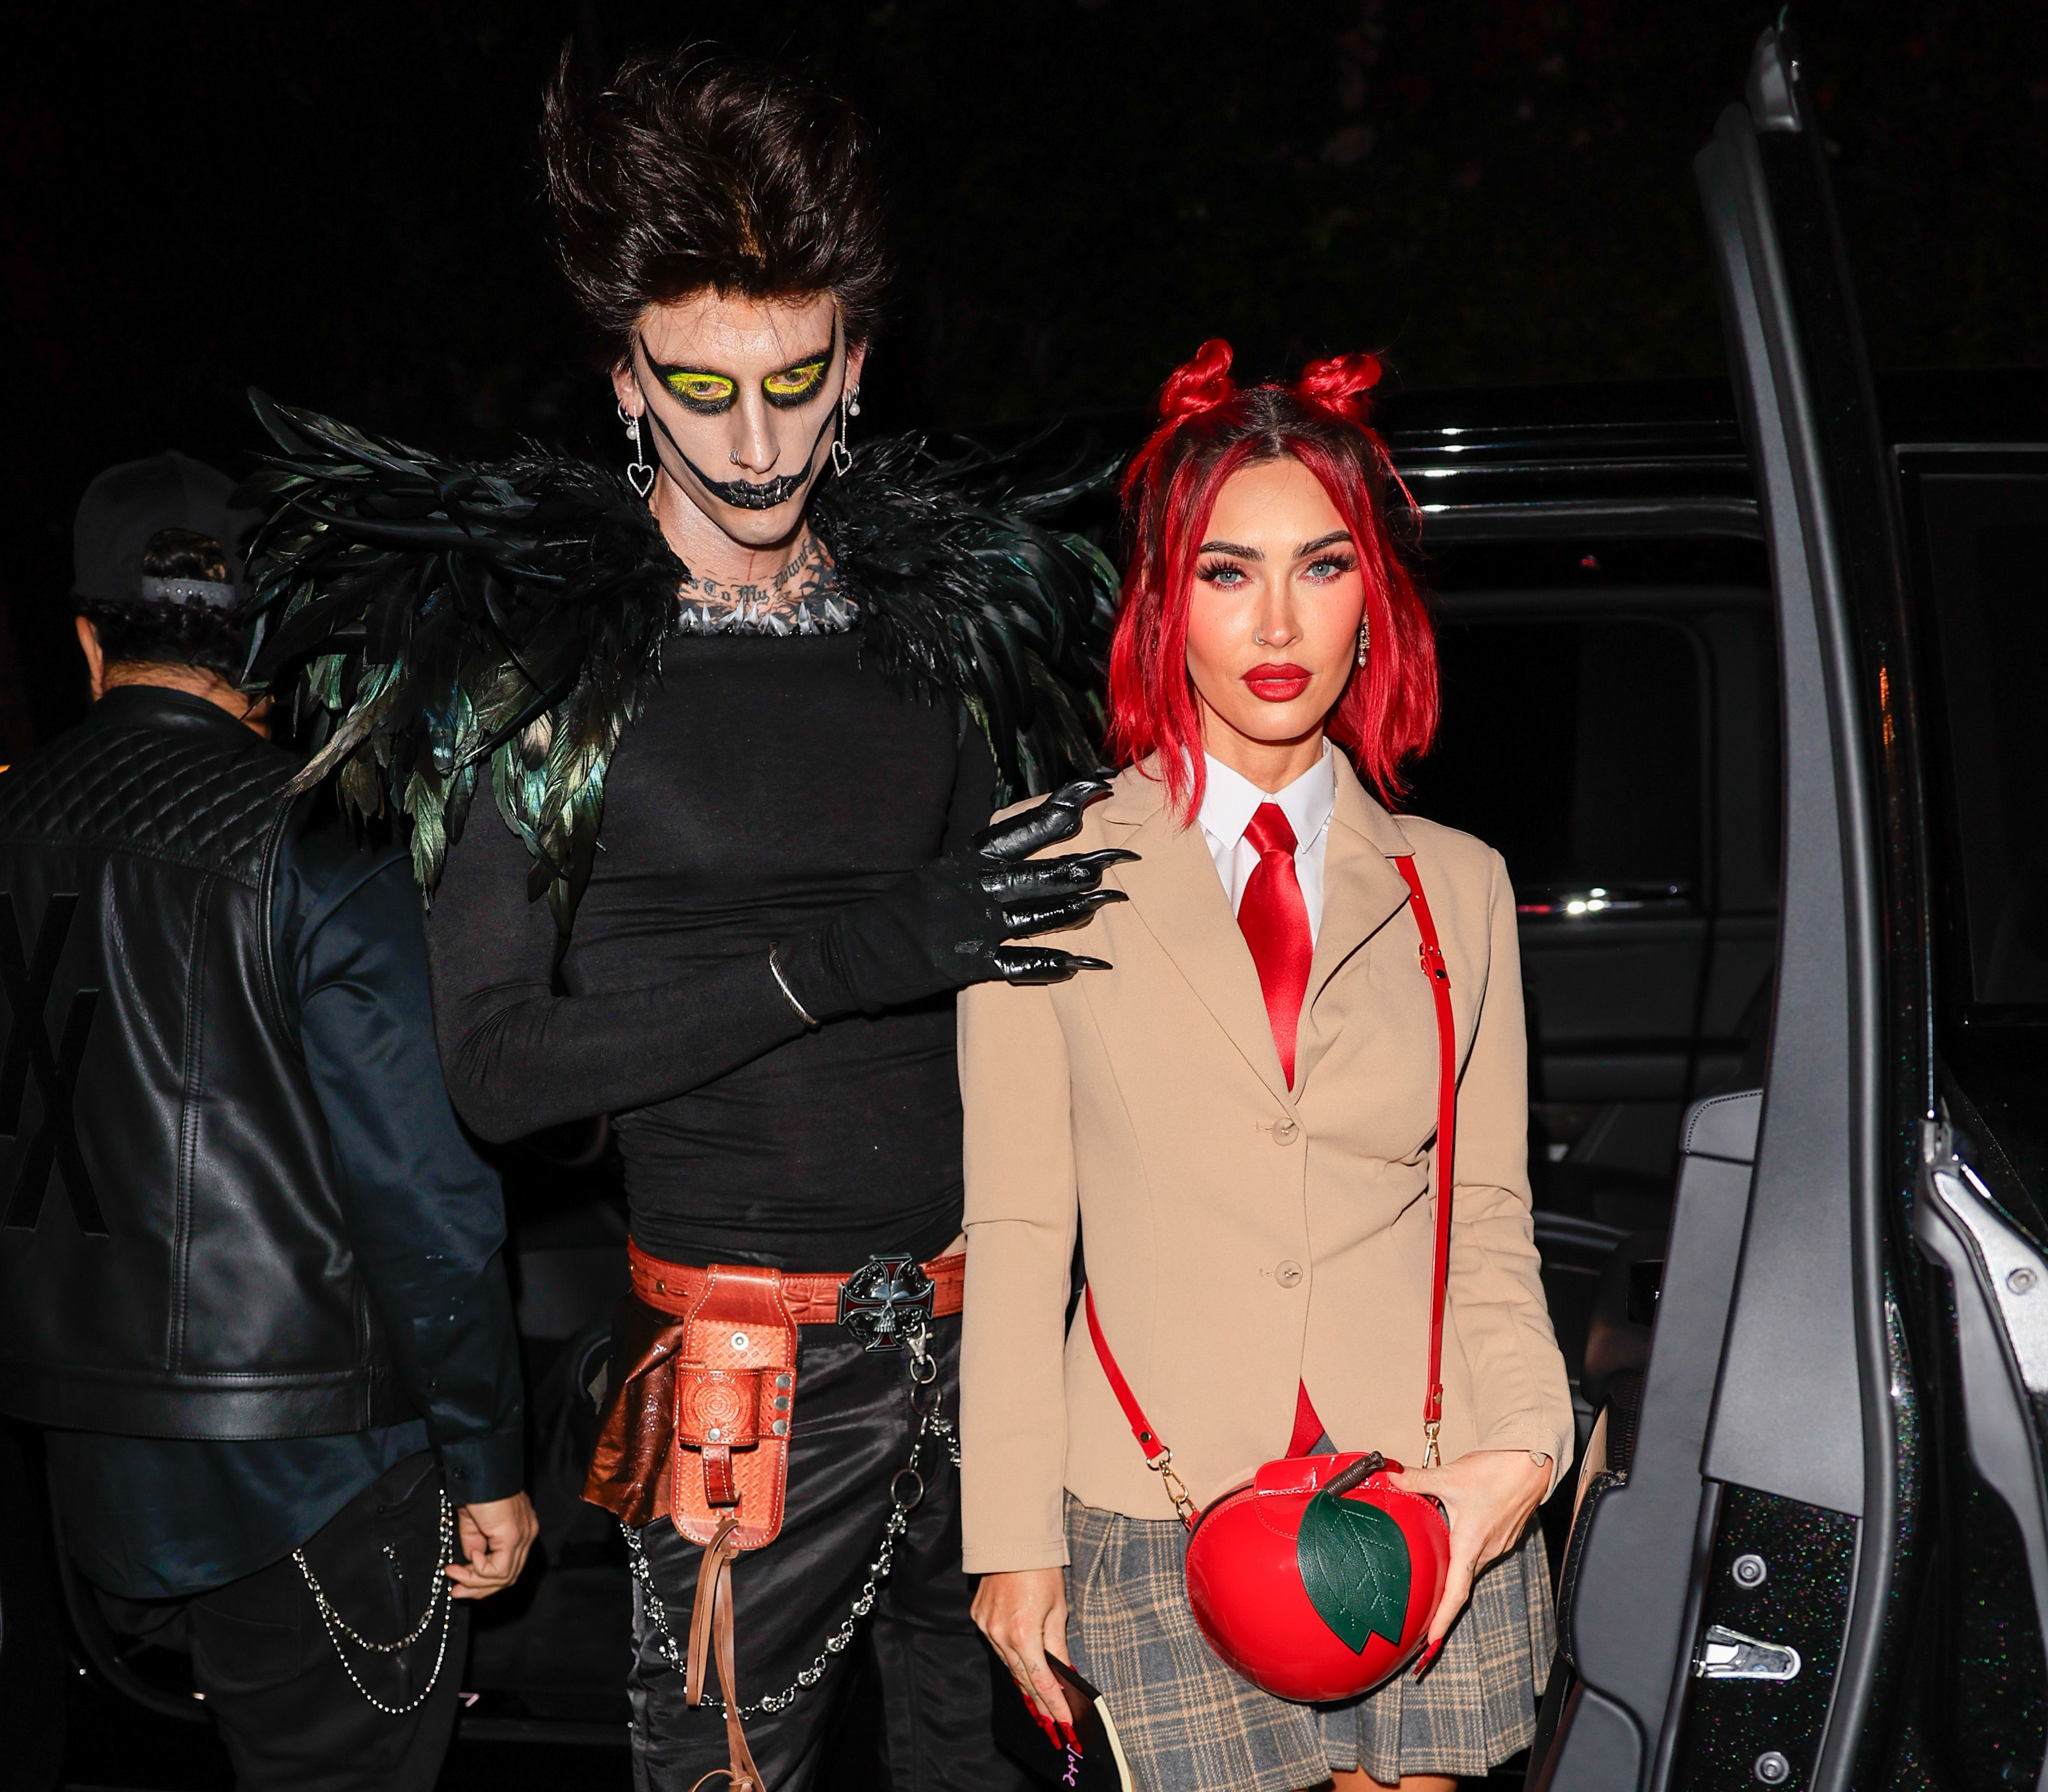 MGK and Megan Fox in costume